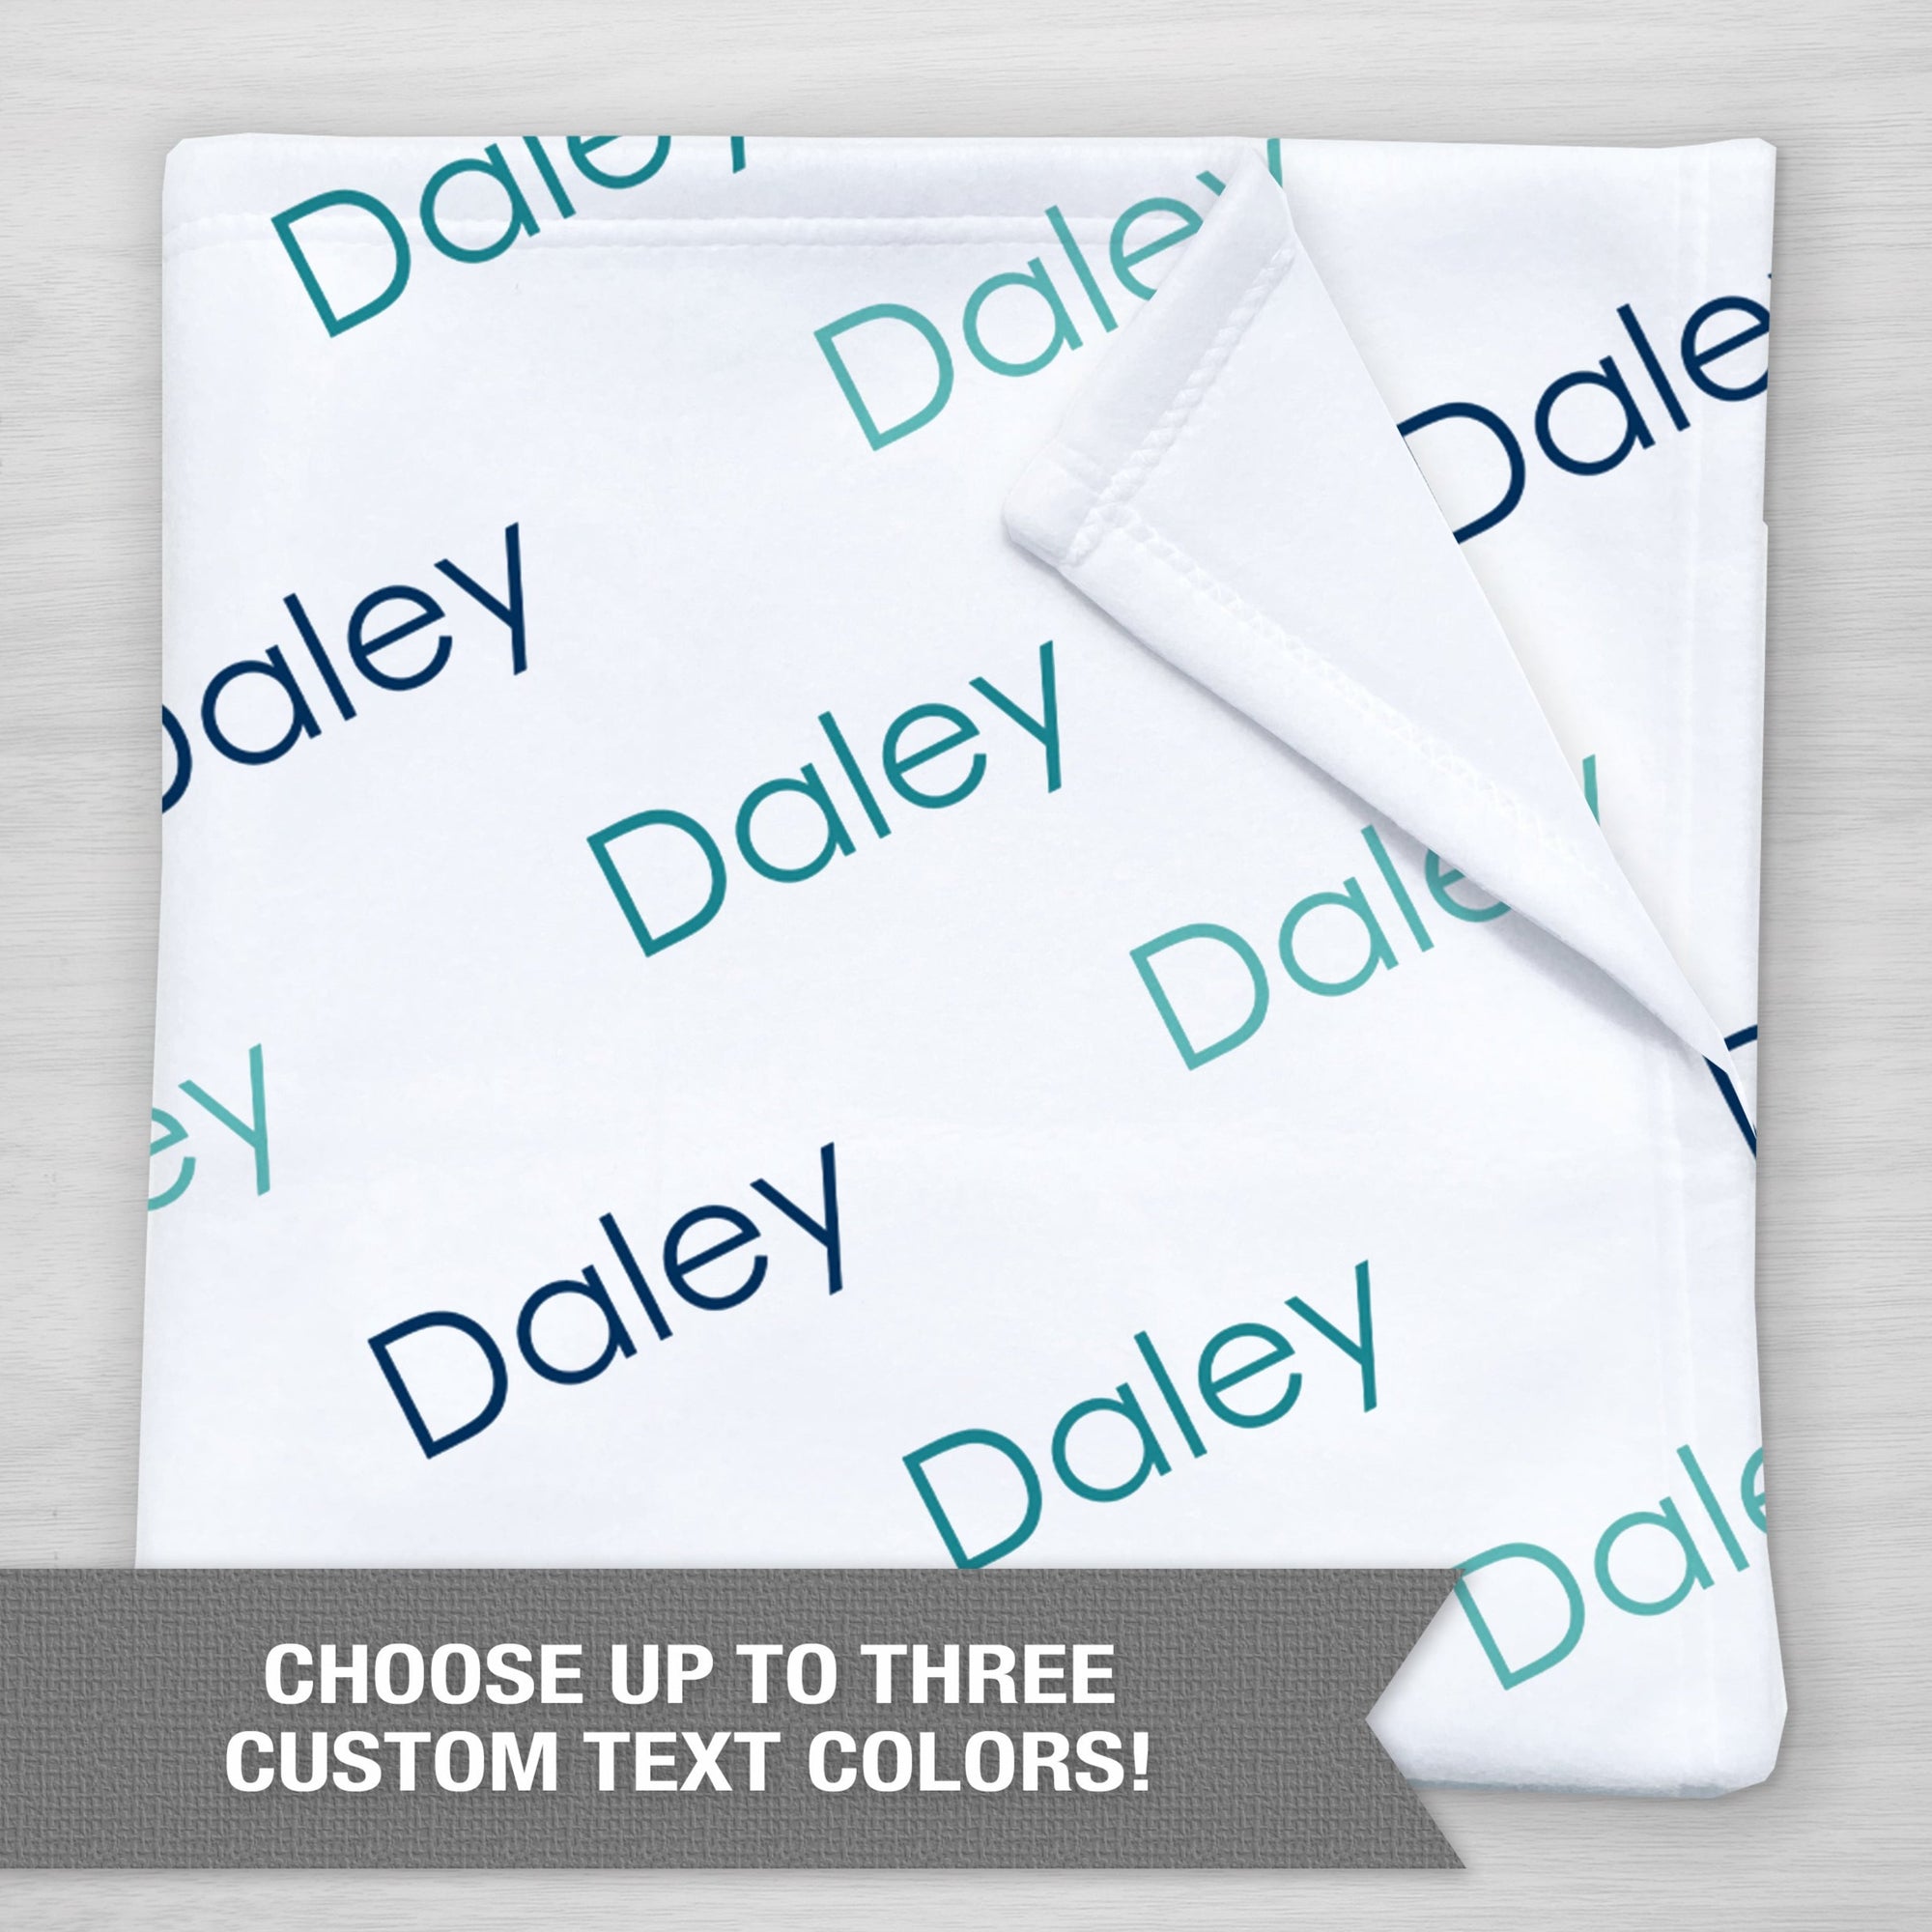 Classic Personalized Name Blanket, choose your own text colors